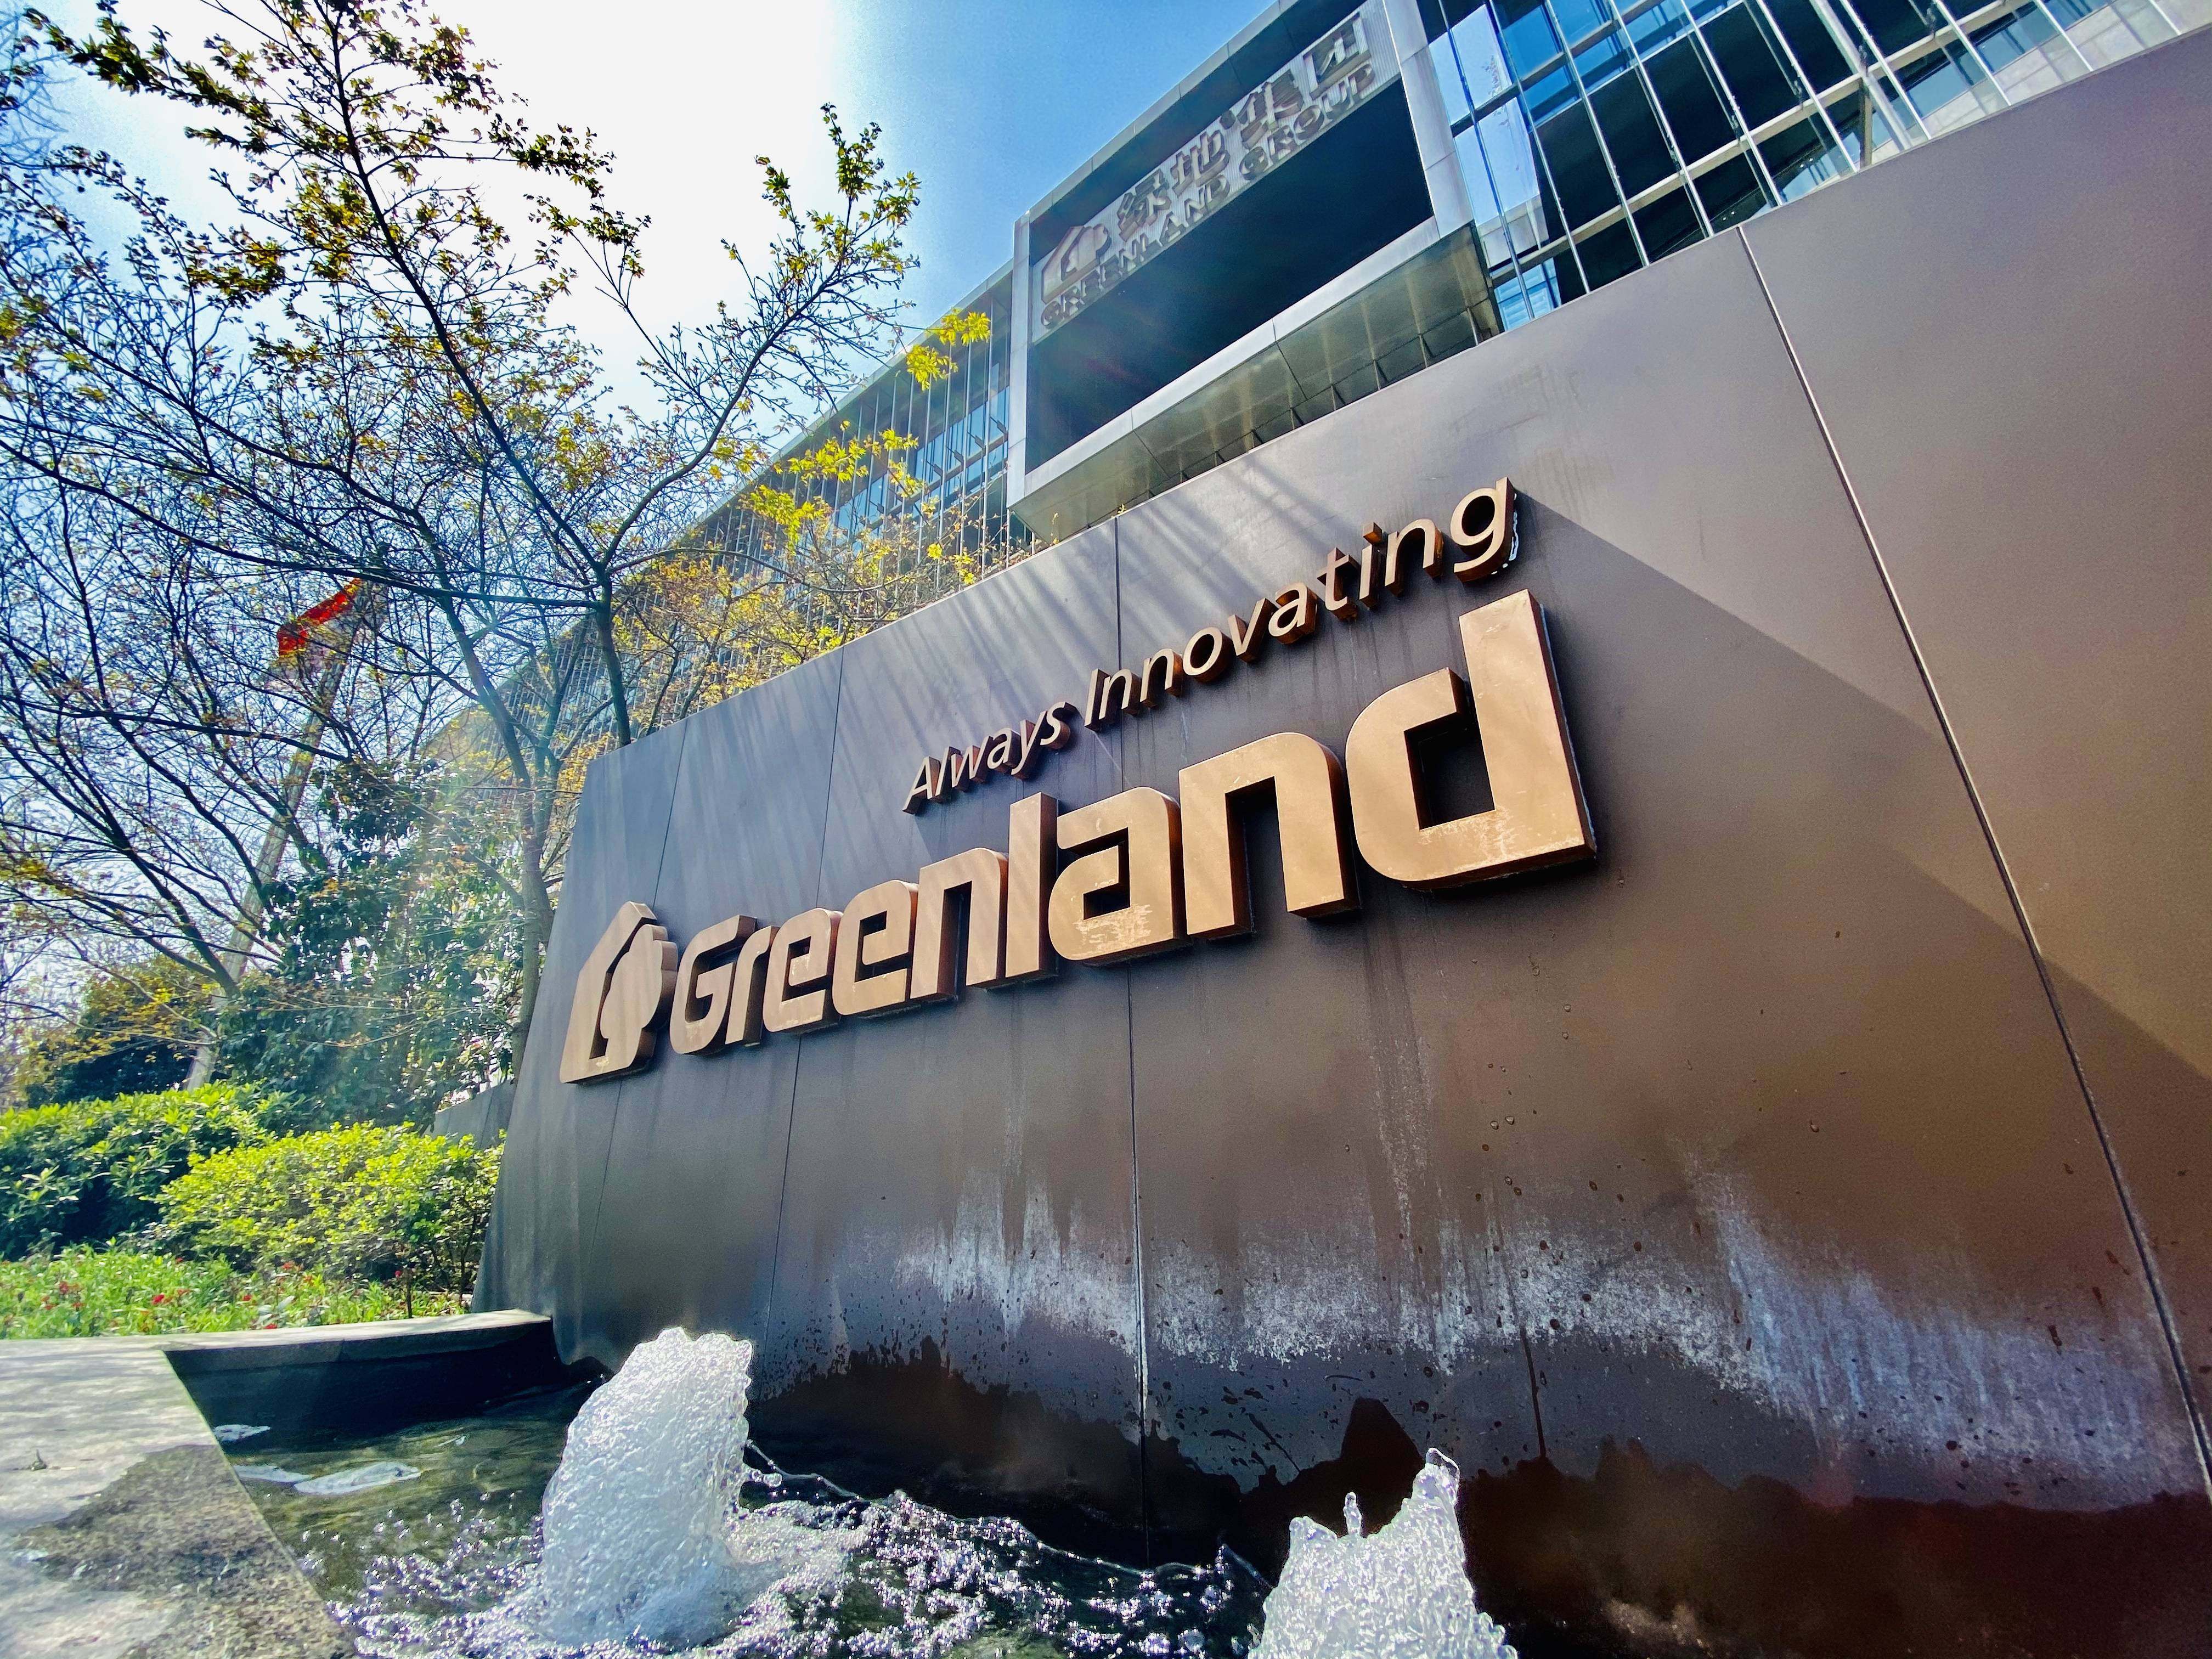 Shanghai-based Greenland Holdings is the city’s largest develop but also has interests in finance, retail, hotels, and digital businesses. Photo: Handout